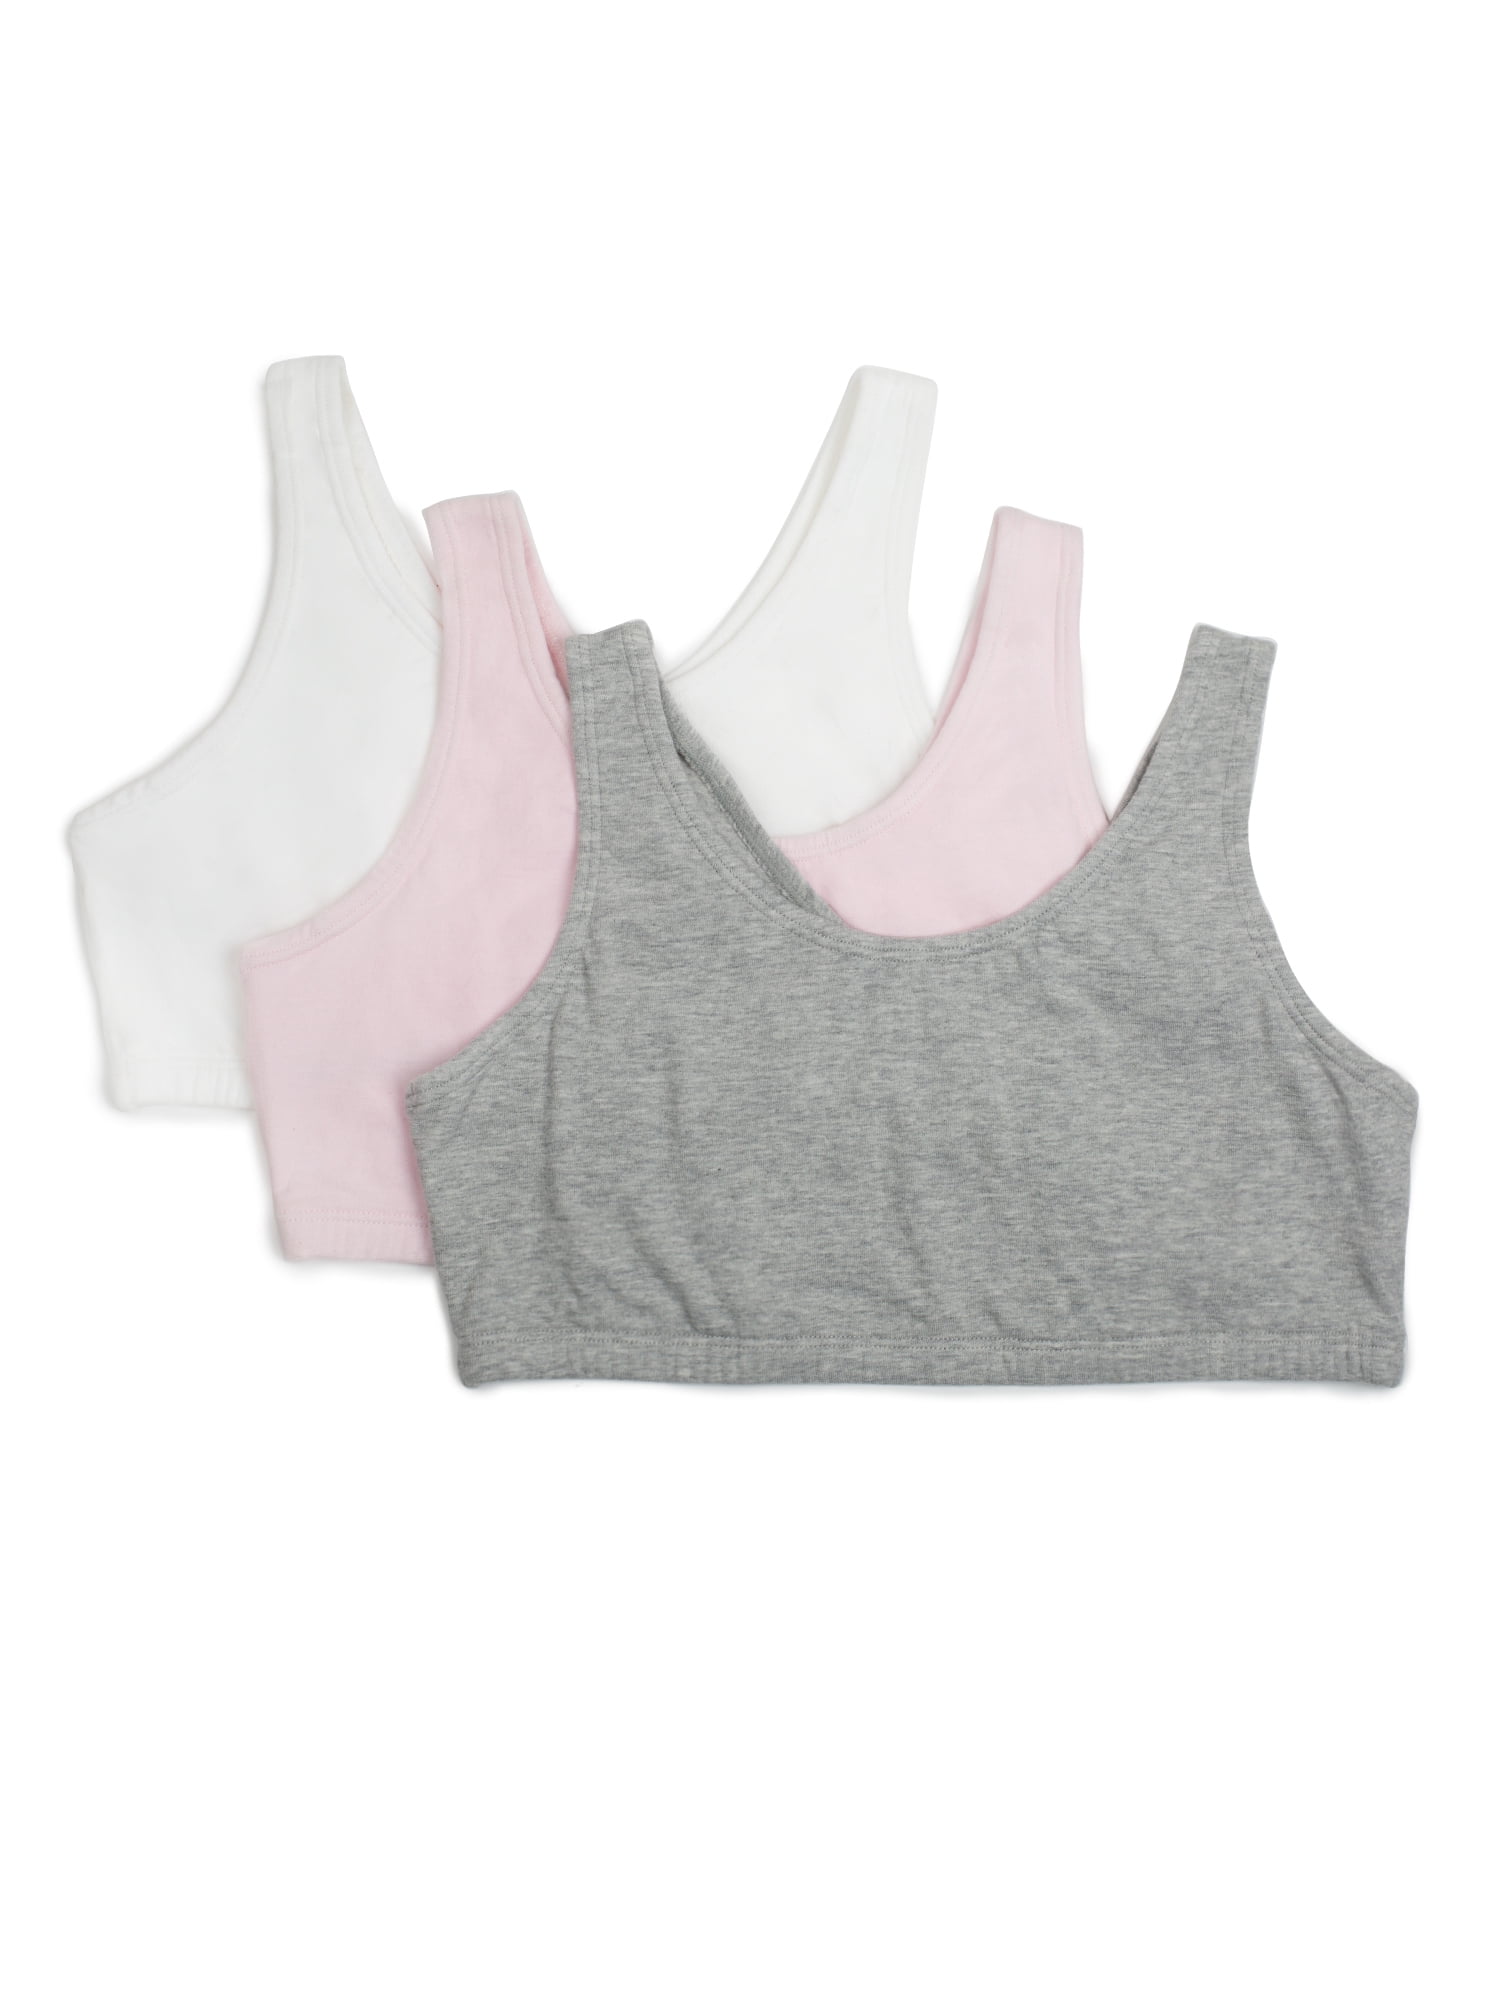 Fruit of the Loom Girls Pull Over Built Up Strap Cotton Sport Bra, 3-Pack,  Sizes 28-38 